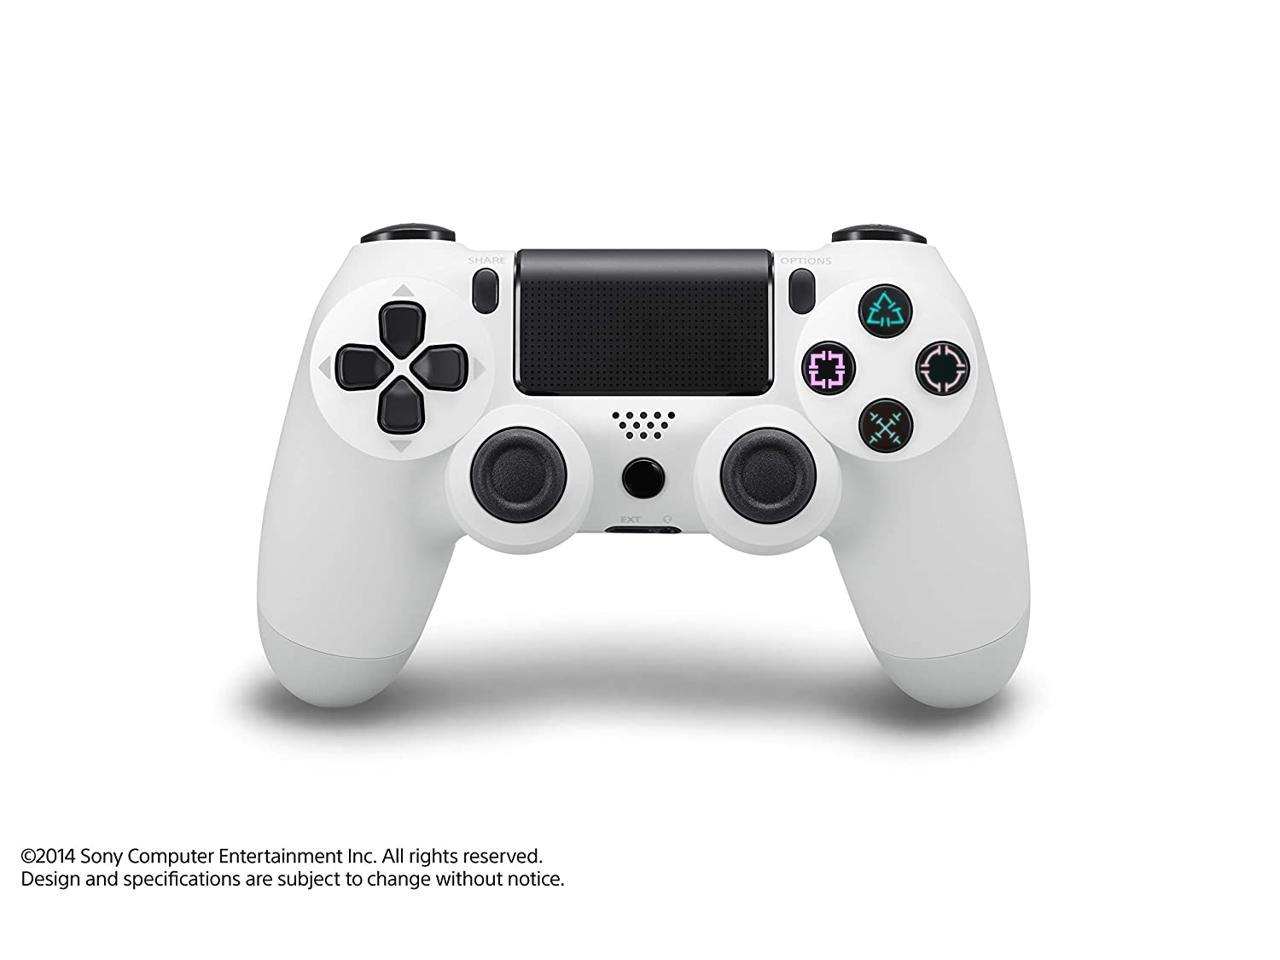 Ps4 Wireless Controller For Playstation 4 New High Quality Ps4 Game Console Ps4 Wireless Bluetooth Handle Fourth Generation Ps4 V2 4 0 Upgrade Newegg Com